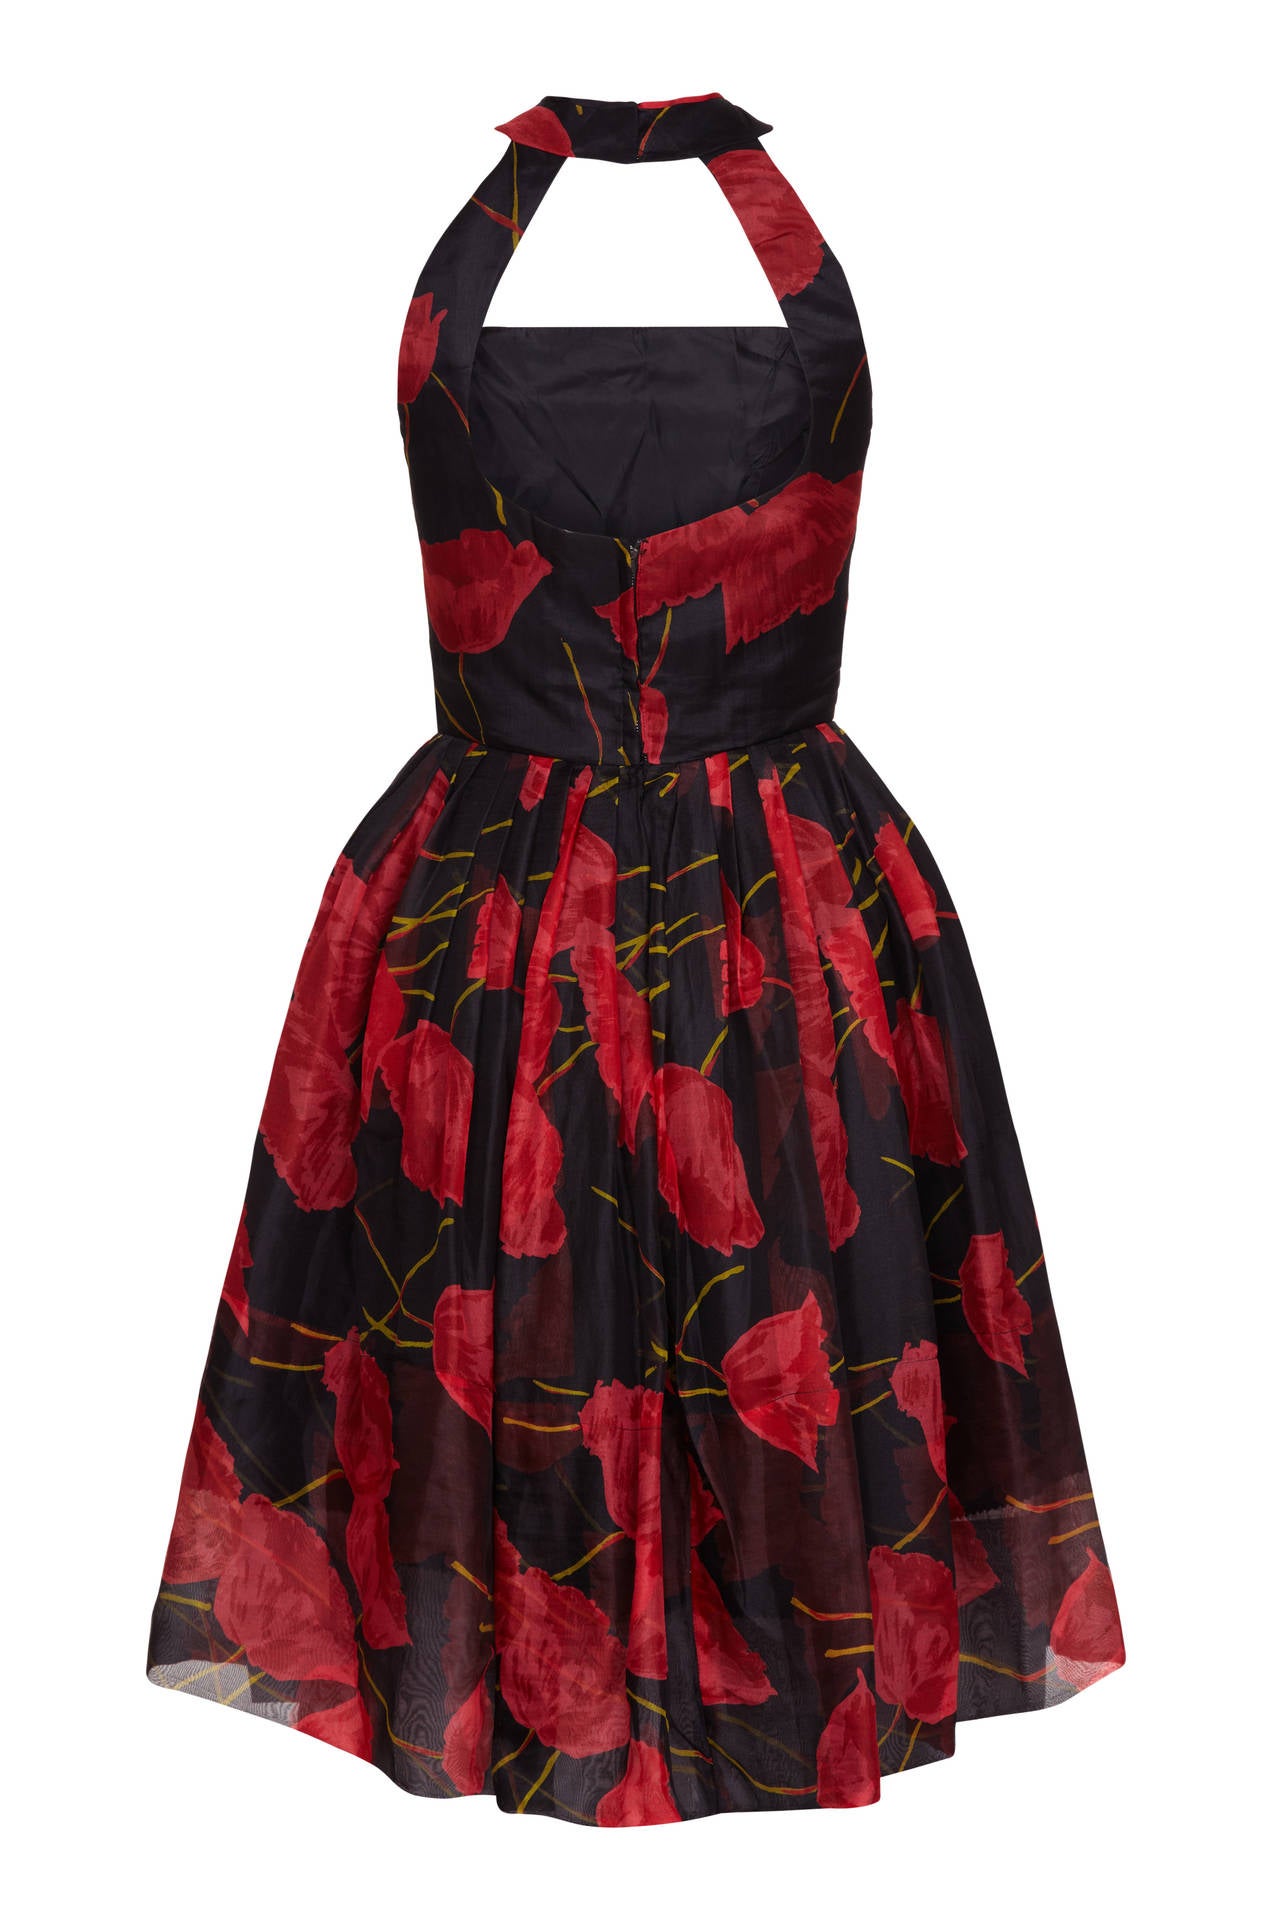 A Fabulous and unusual 1950s party dress in black silk organza with a bold and beautiful red tulip print. Two straps, which are not visible from the front, connect the back of the bodice to the collar piece, which sits around neck.  It is fully